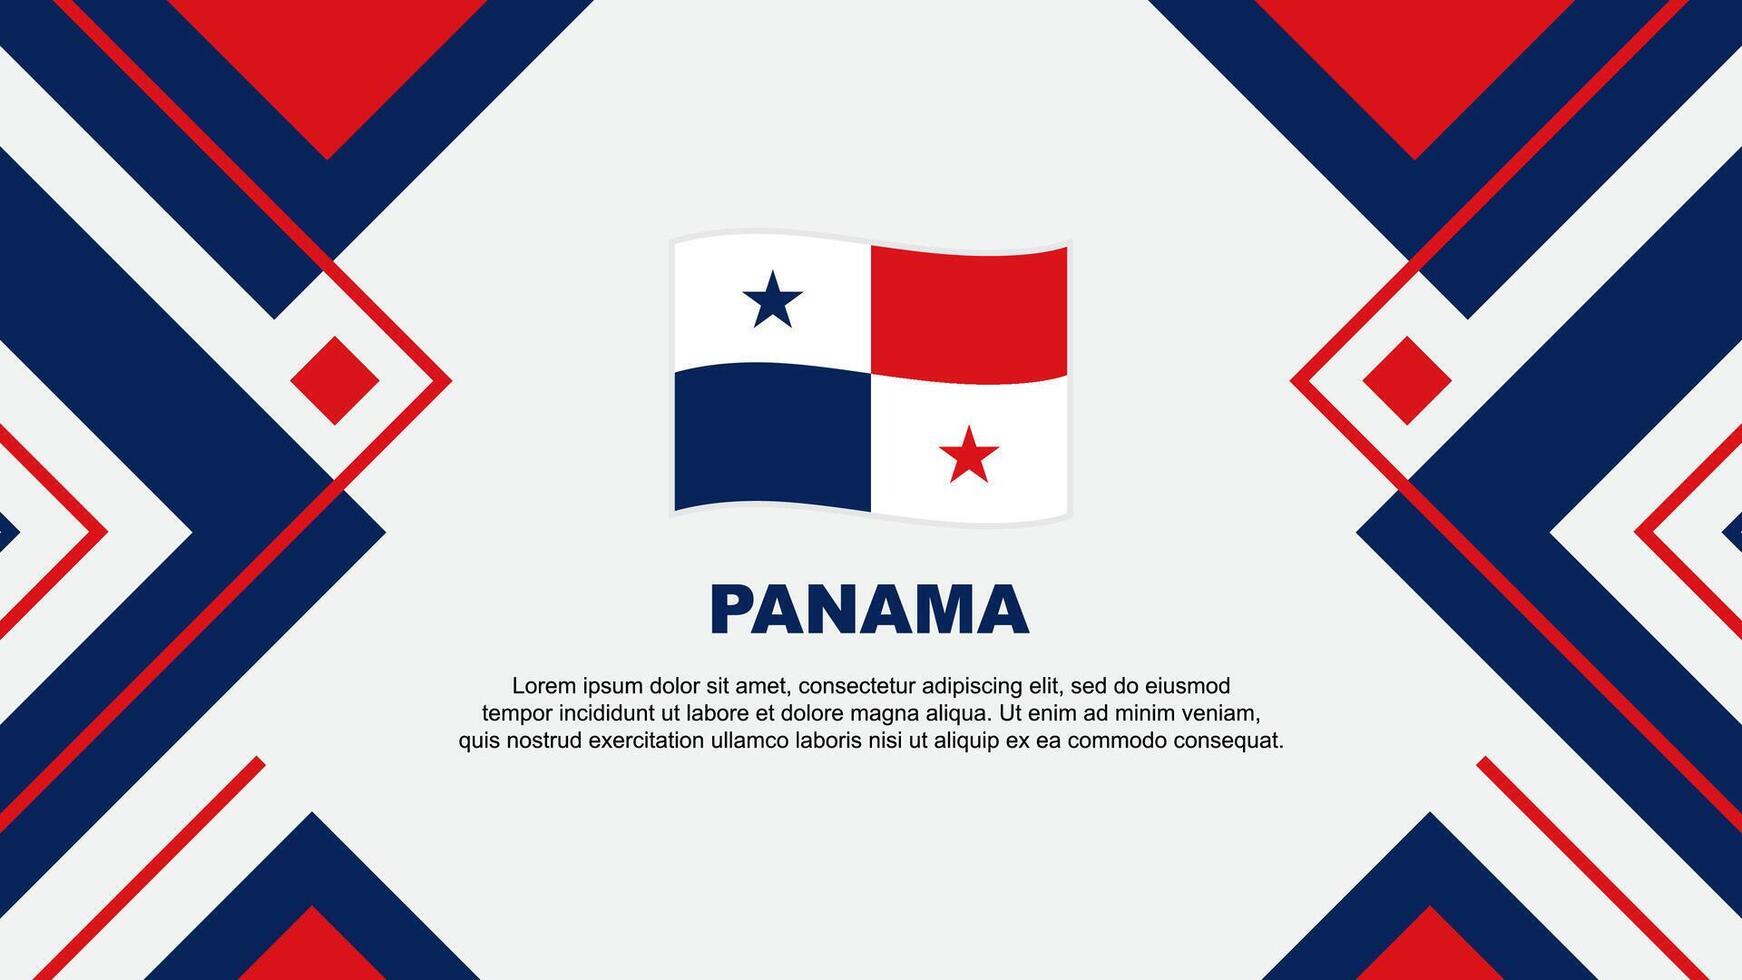 Panama Flag Abstract Background Design Template. Panama Independence Day Banner Wallpaper Vector Illustration. Panama Illustration